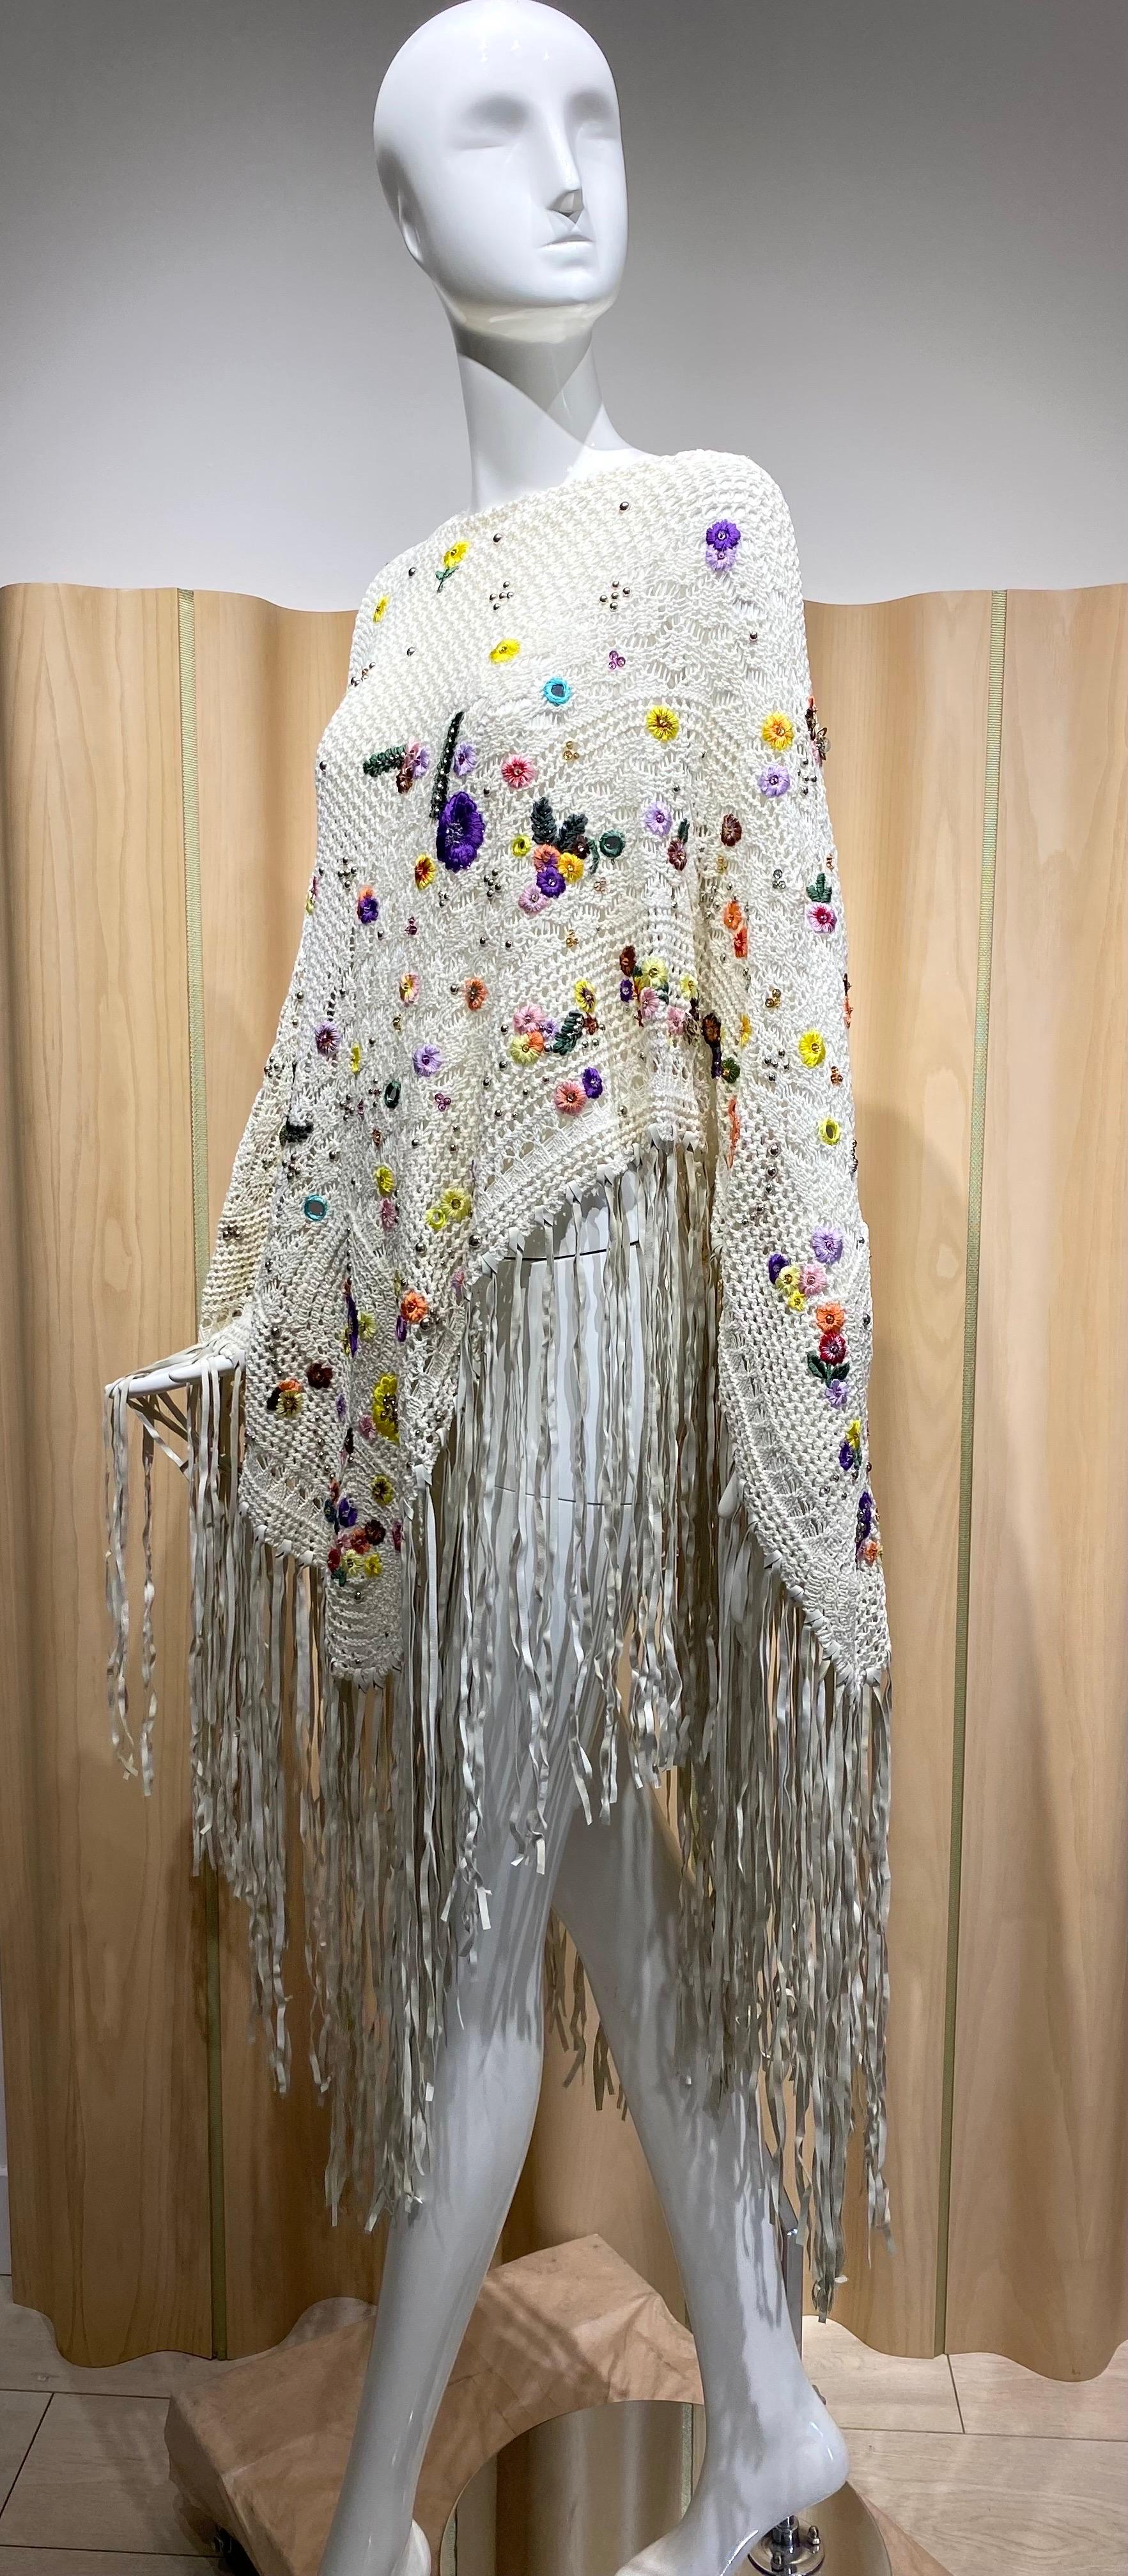 PUCCI White crochet fringe shawl poncho embroidered with Yellow, Purple, Orange flowers thread and small metal beads. Fit size small to XL
